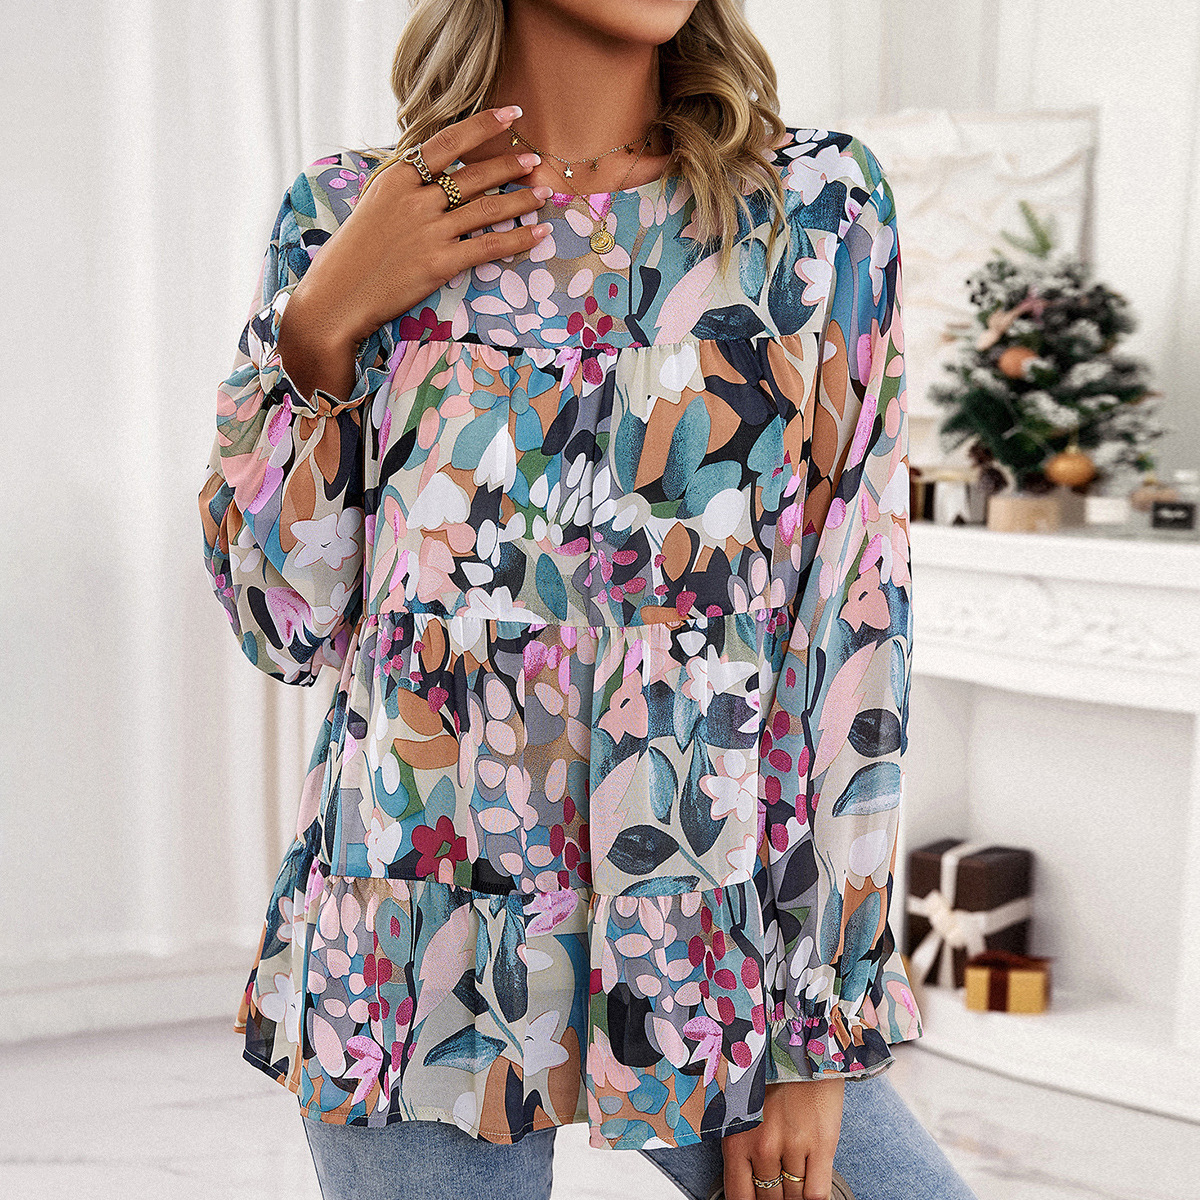 European style autumn and winter printing tops